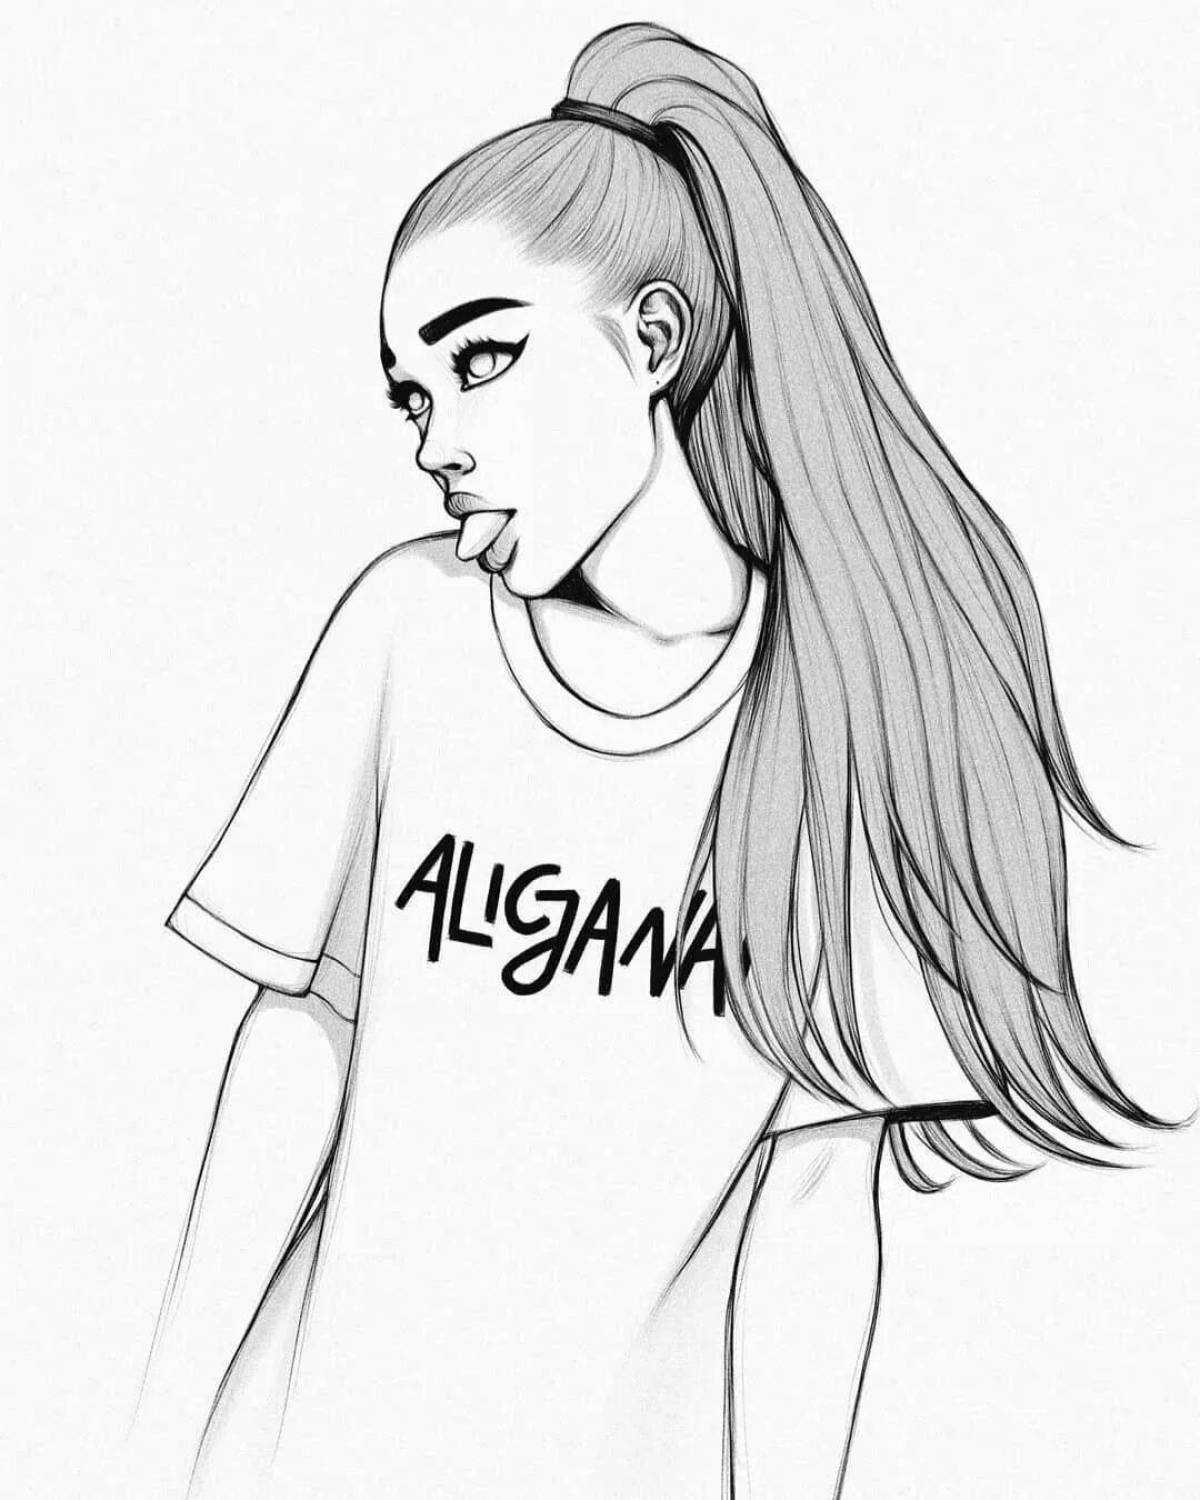 Ariana grande's gorgeous coloring page